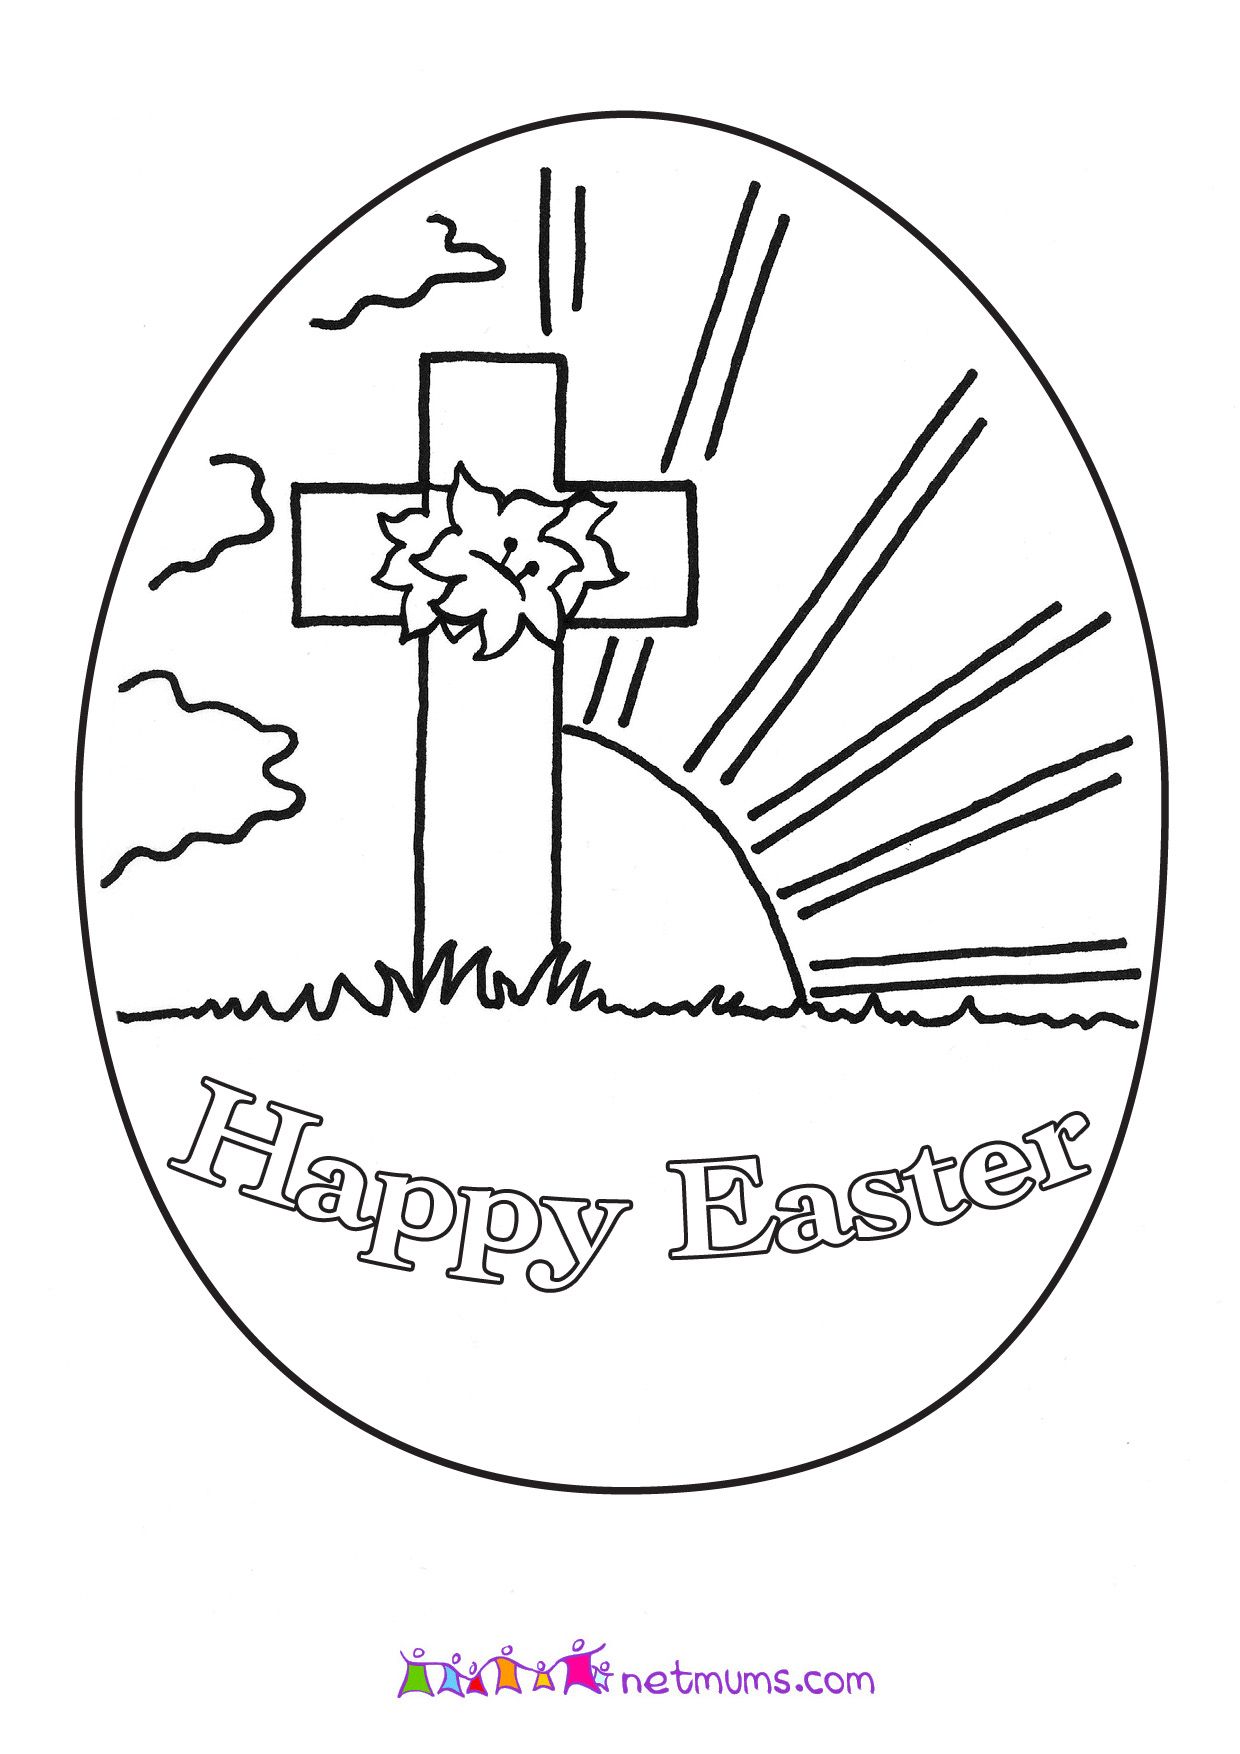 Easter colouring pages for kids to enjoy easter coloring pages printable easter coloring pages easter coloring sheets